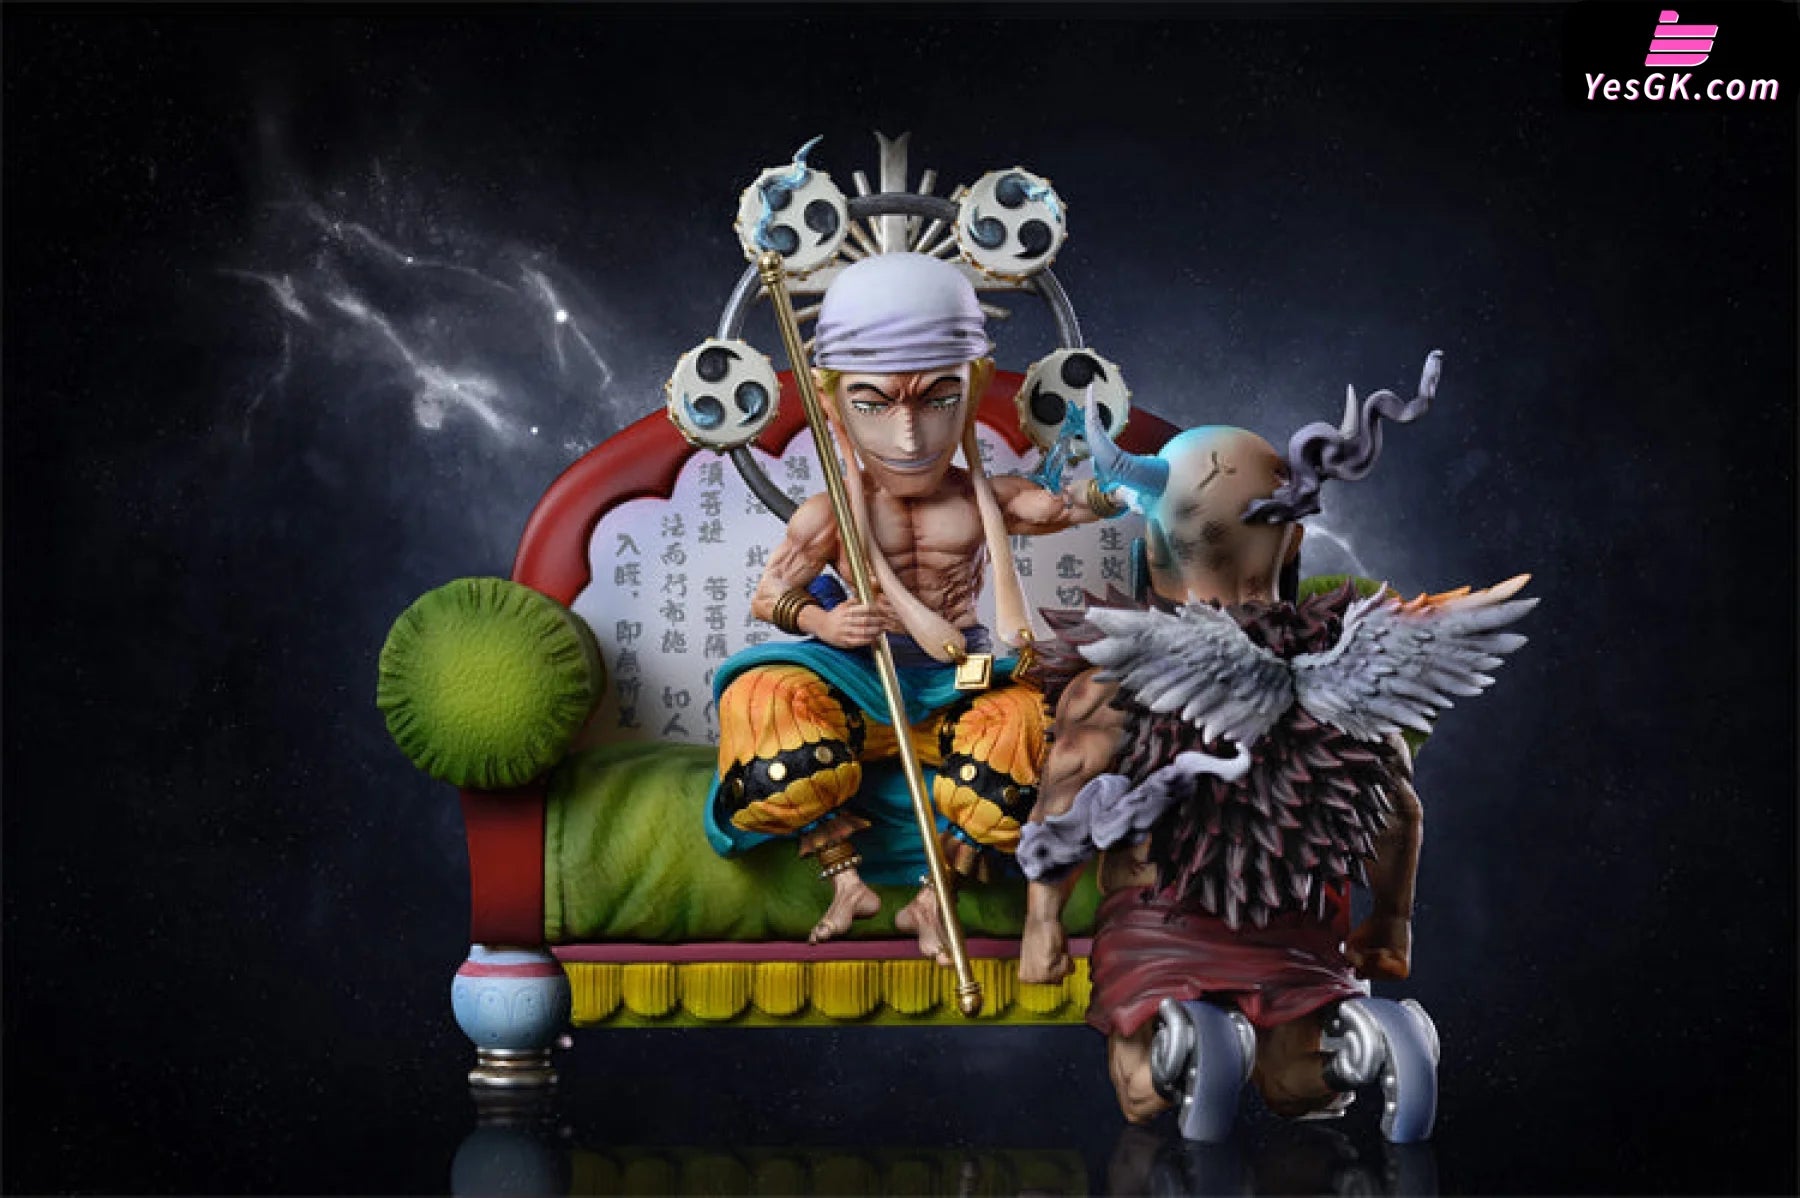 One Piece Enel Resin Statue - G5 Studio [Pre-Order Closed] Full Payment